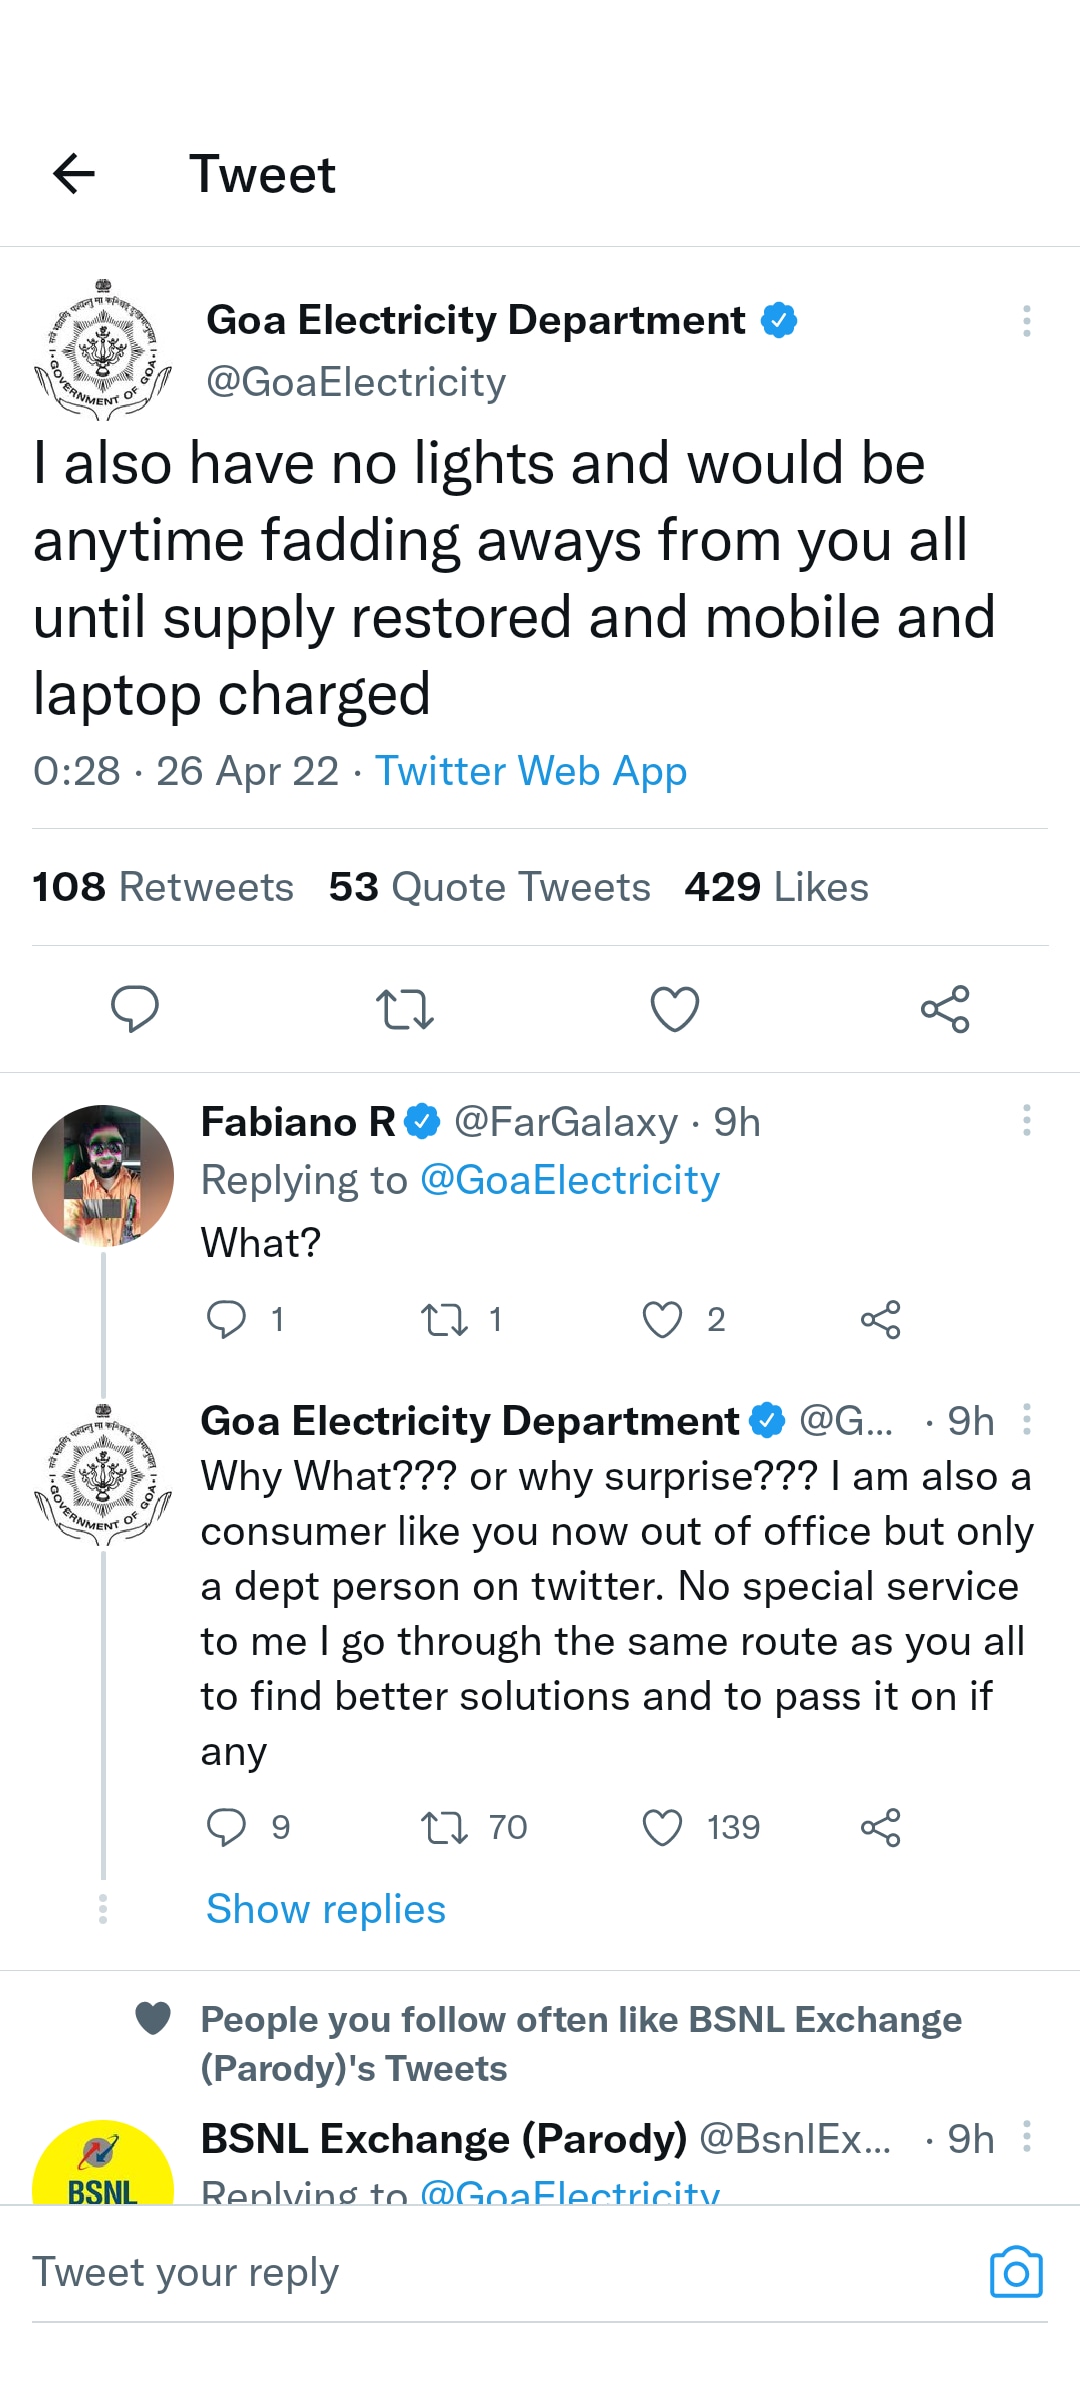 Goa electricity department's candid tweets on power disruptions(Screenshot (@GoaElectricity))